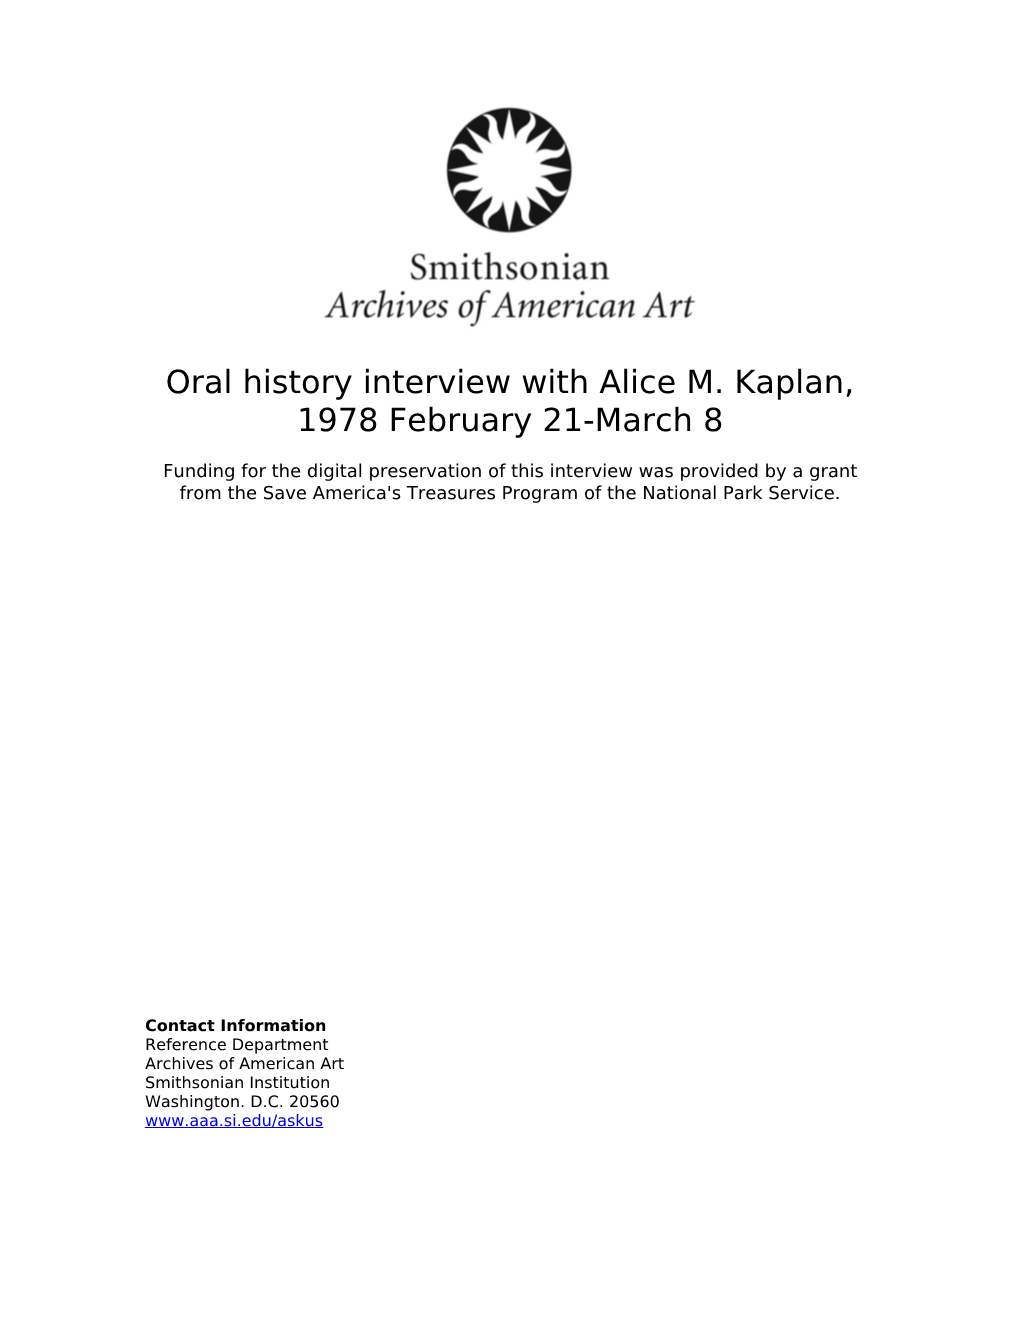 Oral History Interview with Alice M. Kaplan, 1978 February 21-March 8